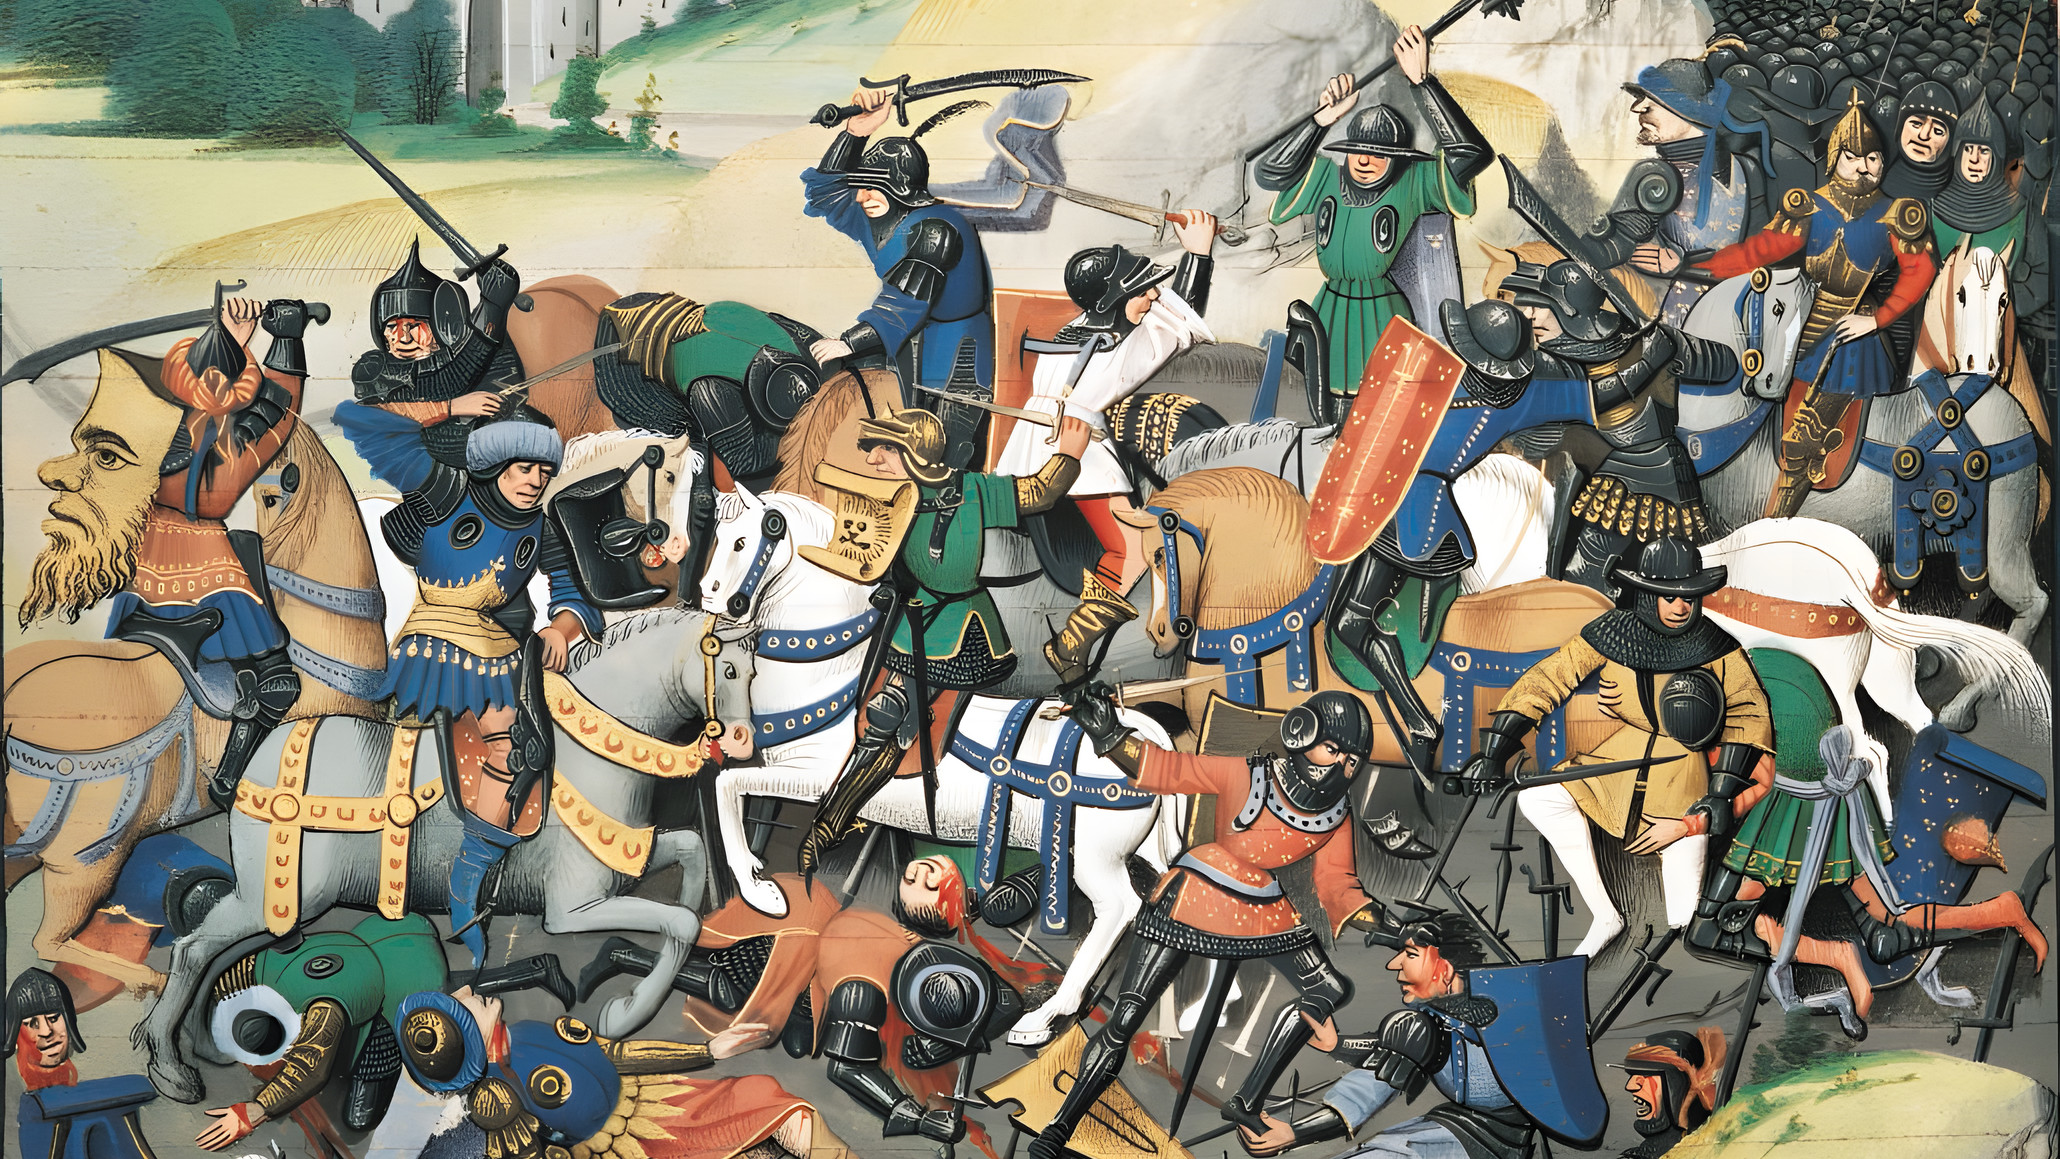 European knights battle Seljuq Turks outside the walls of Antioch. The city was a stronghold blocking the Crusaders’ way to the Holy Land.